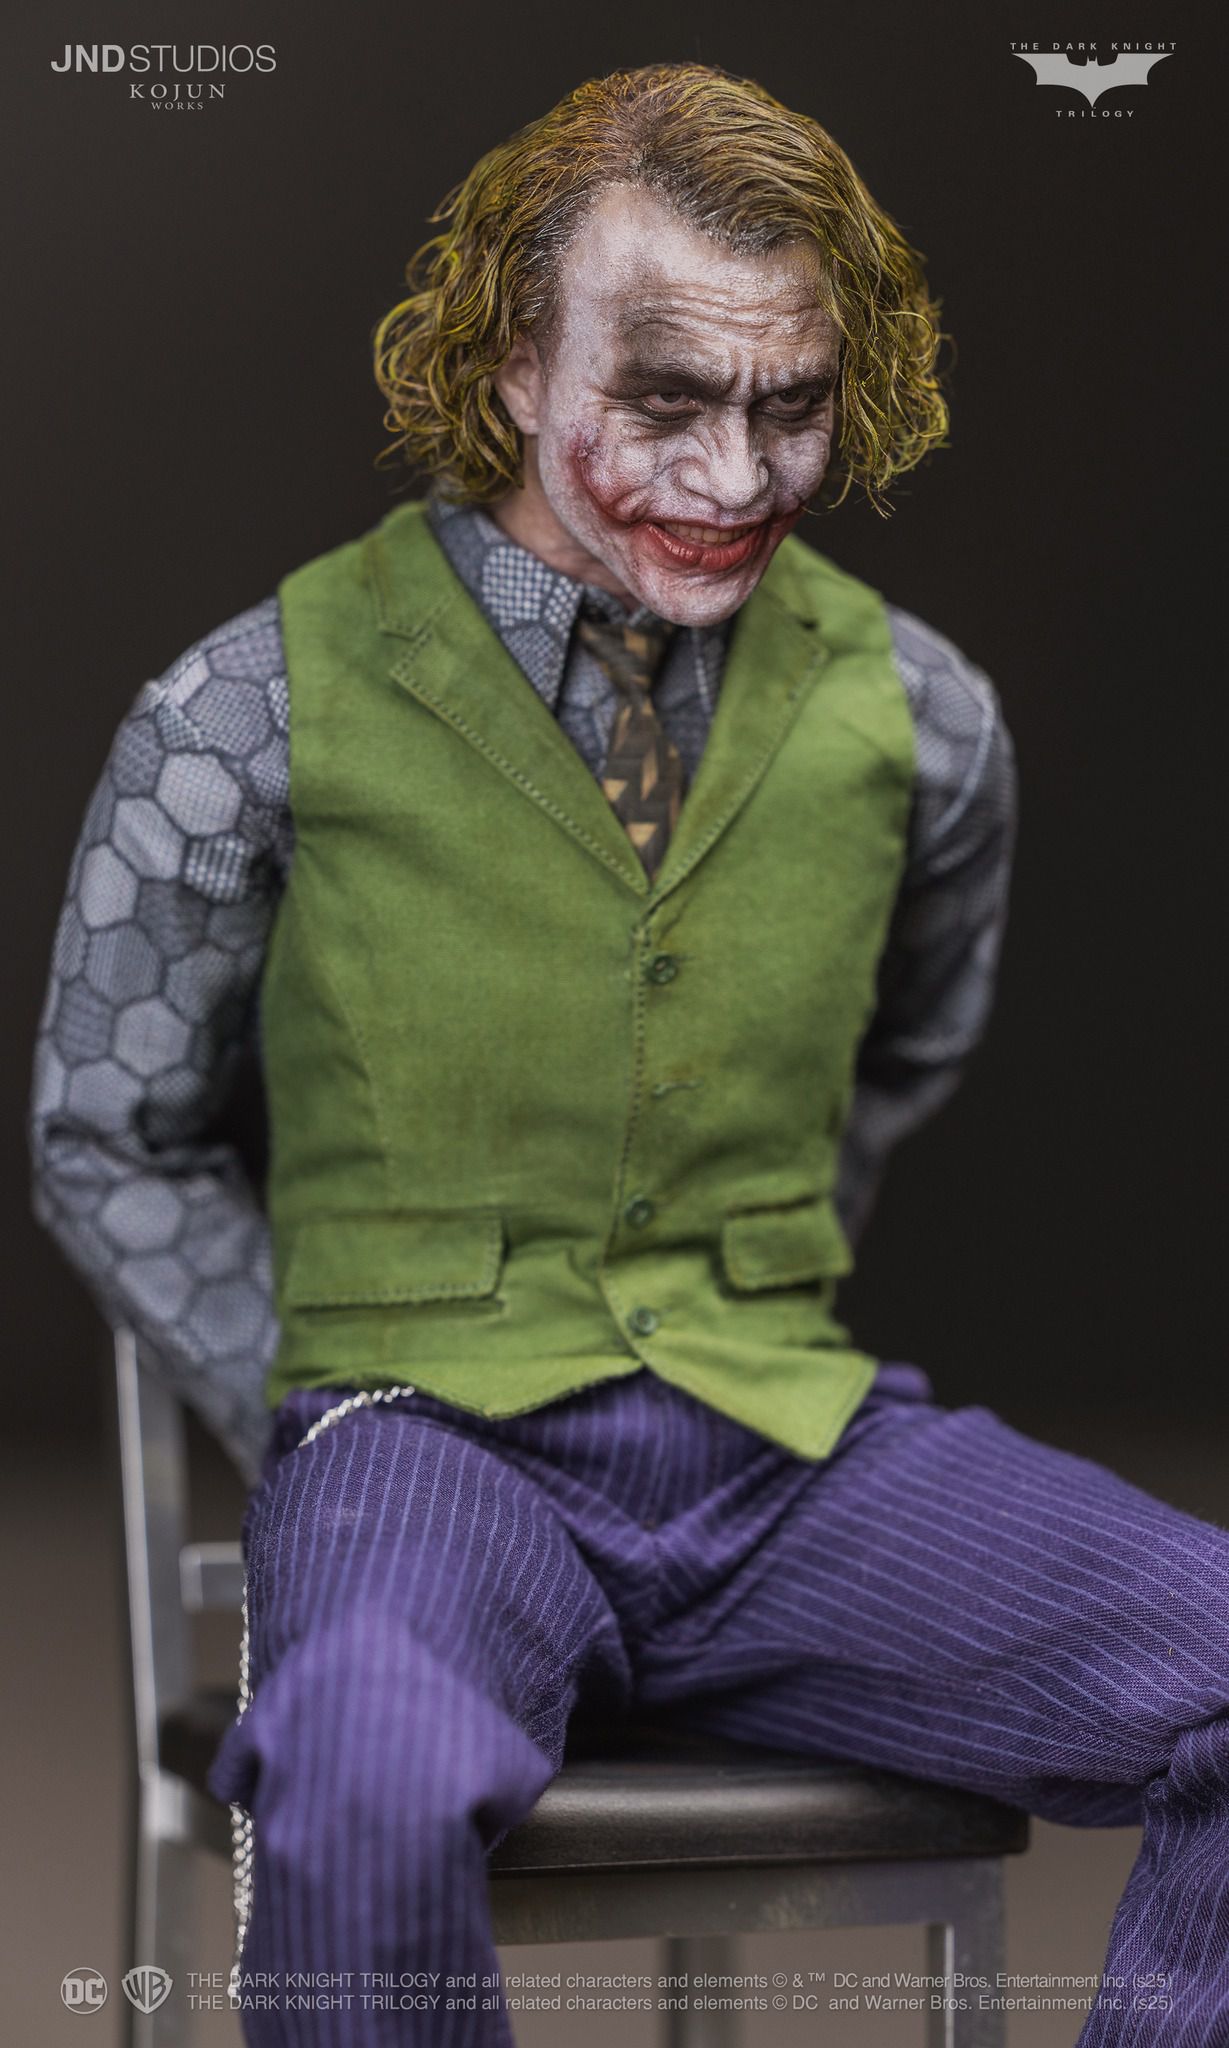 Amazingly Hyper Realistic Sculptures Of Superheroes And Villains By Jnd Studios (7)